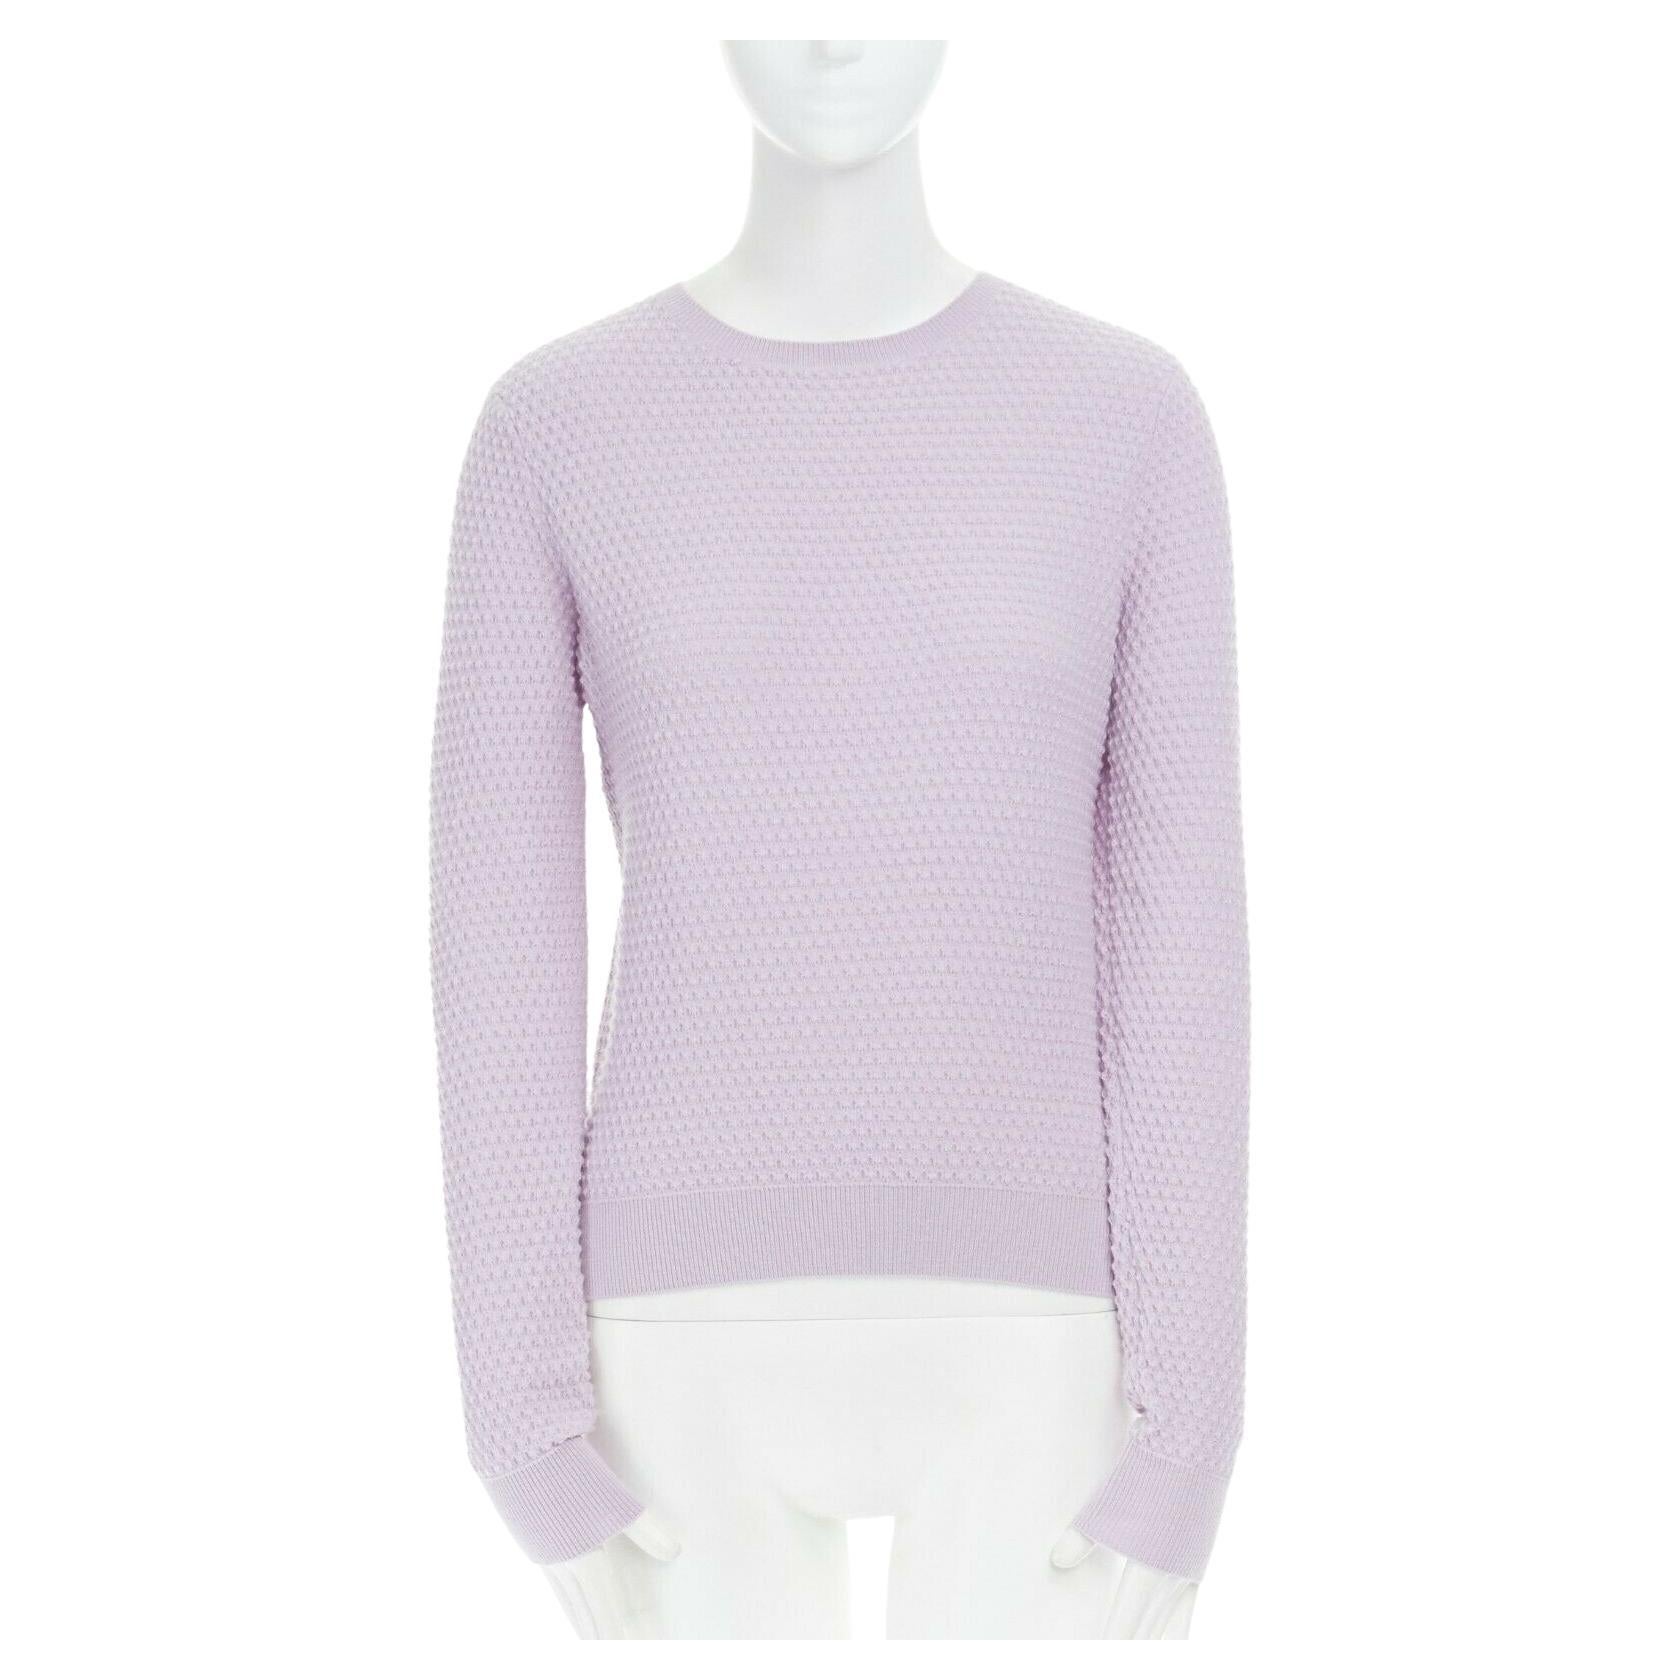 CARVEN wool blend pastel lilac purple textured knit long sleeve sweater top M